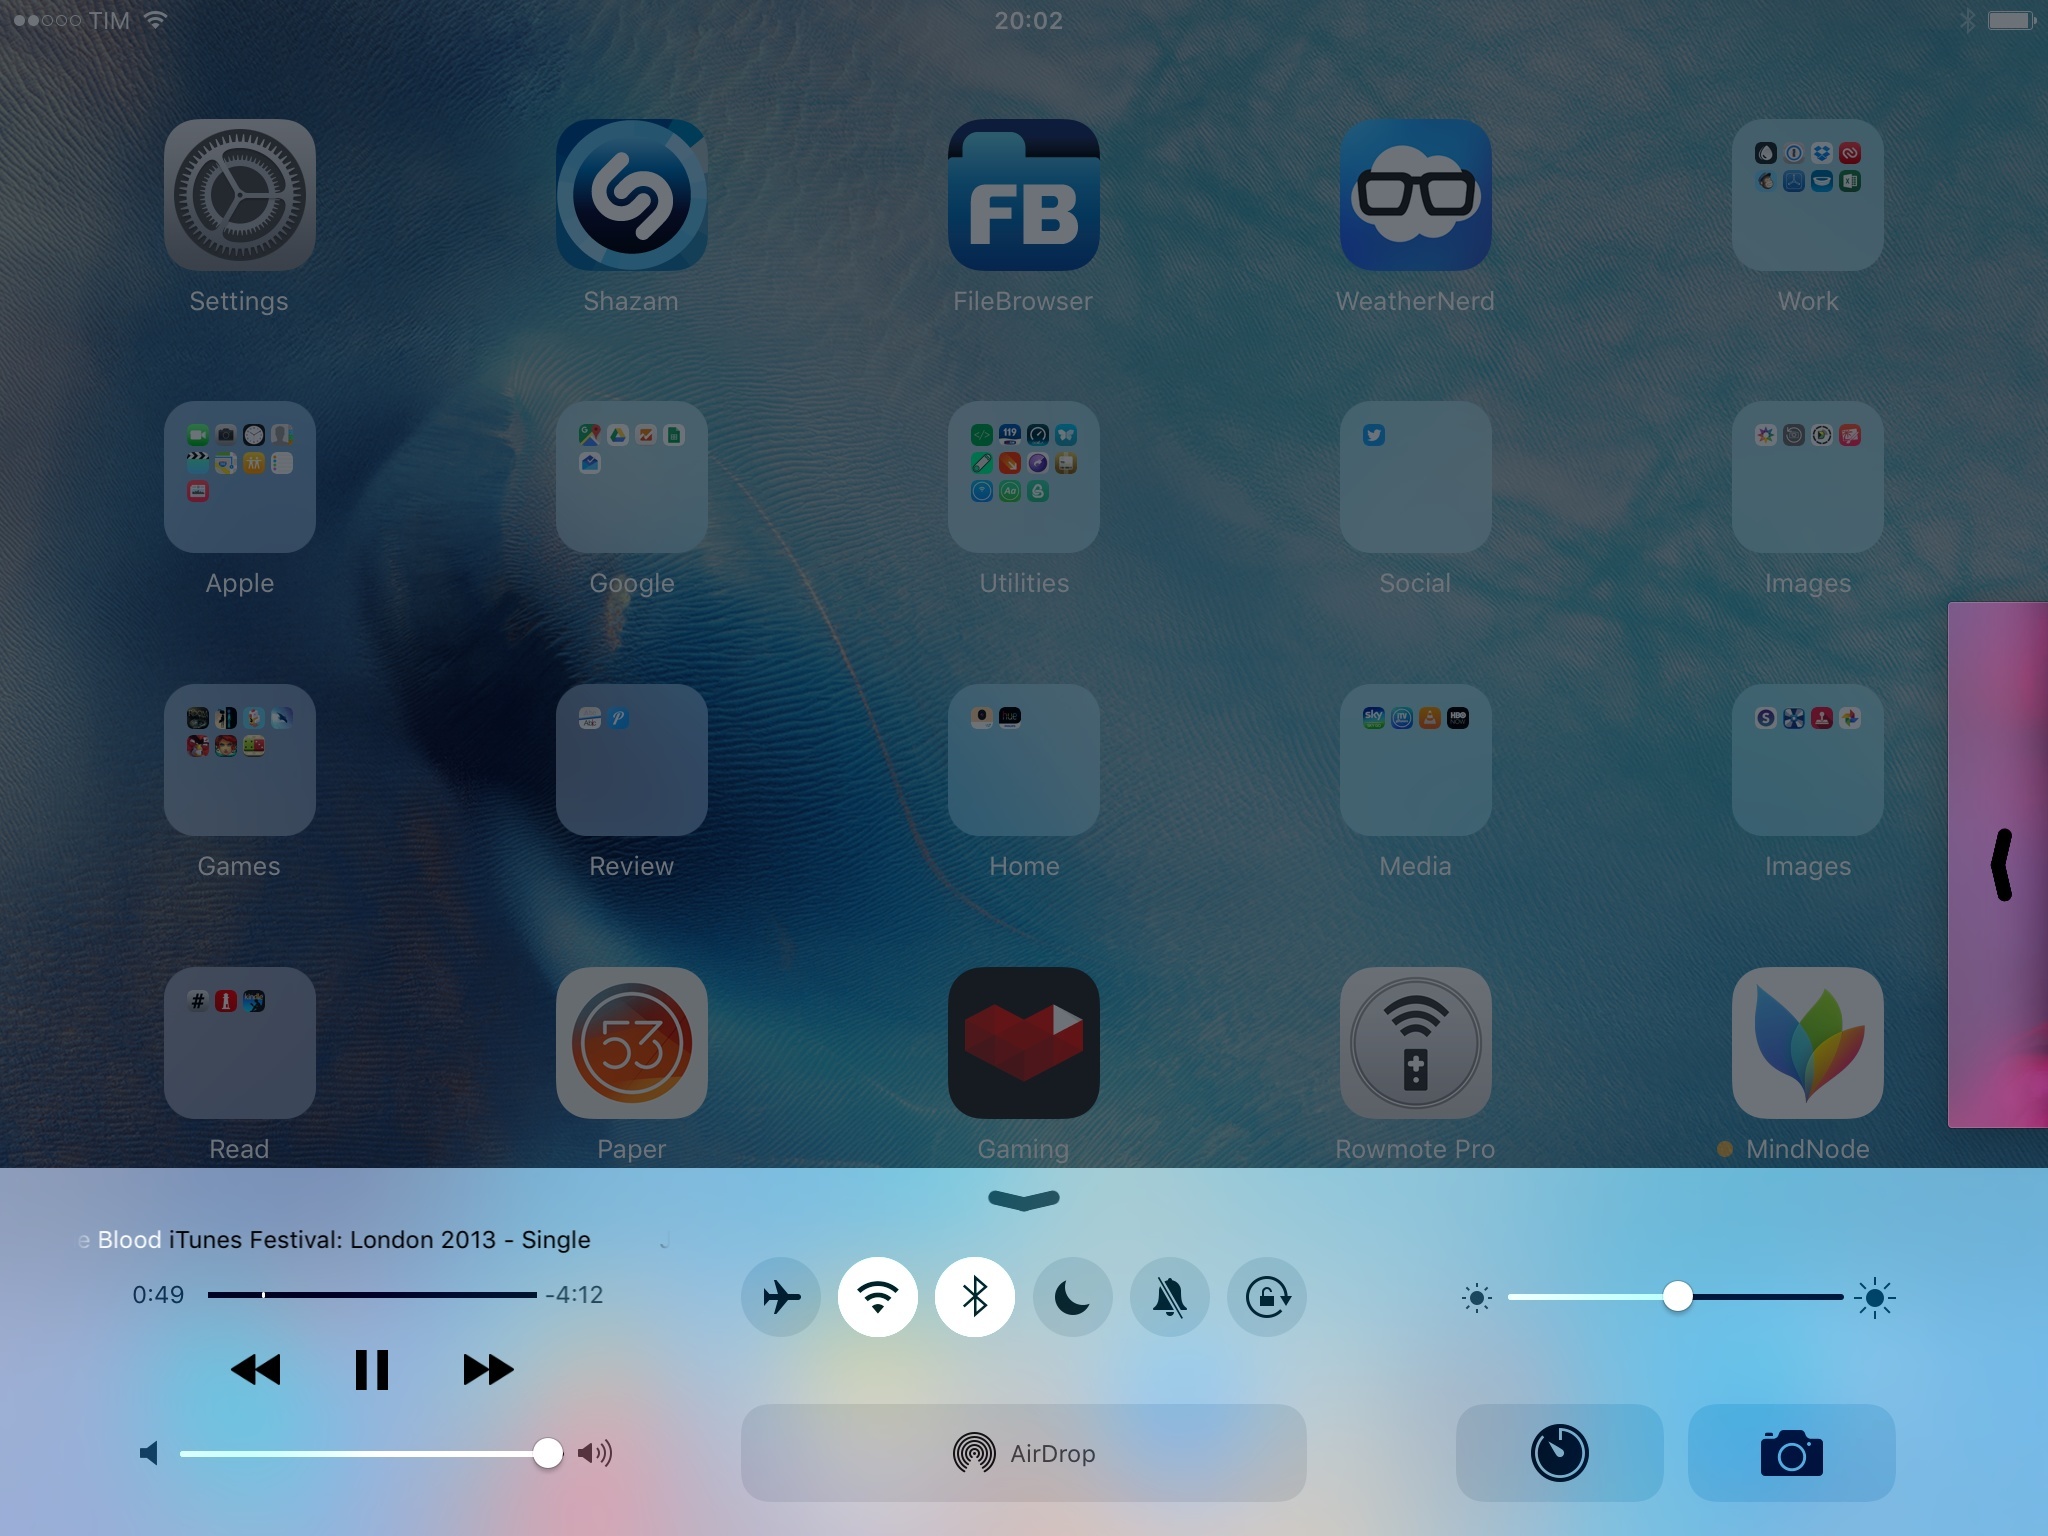 Hidden Picture in Picture, automatically placed above Control Center.